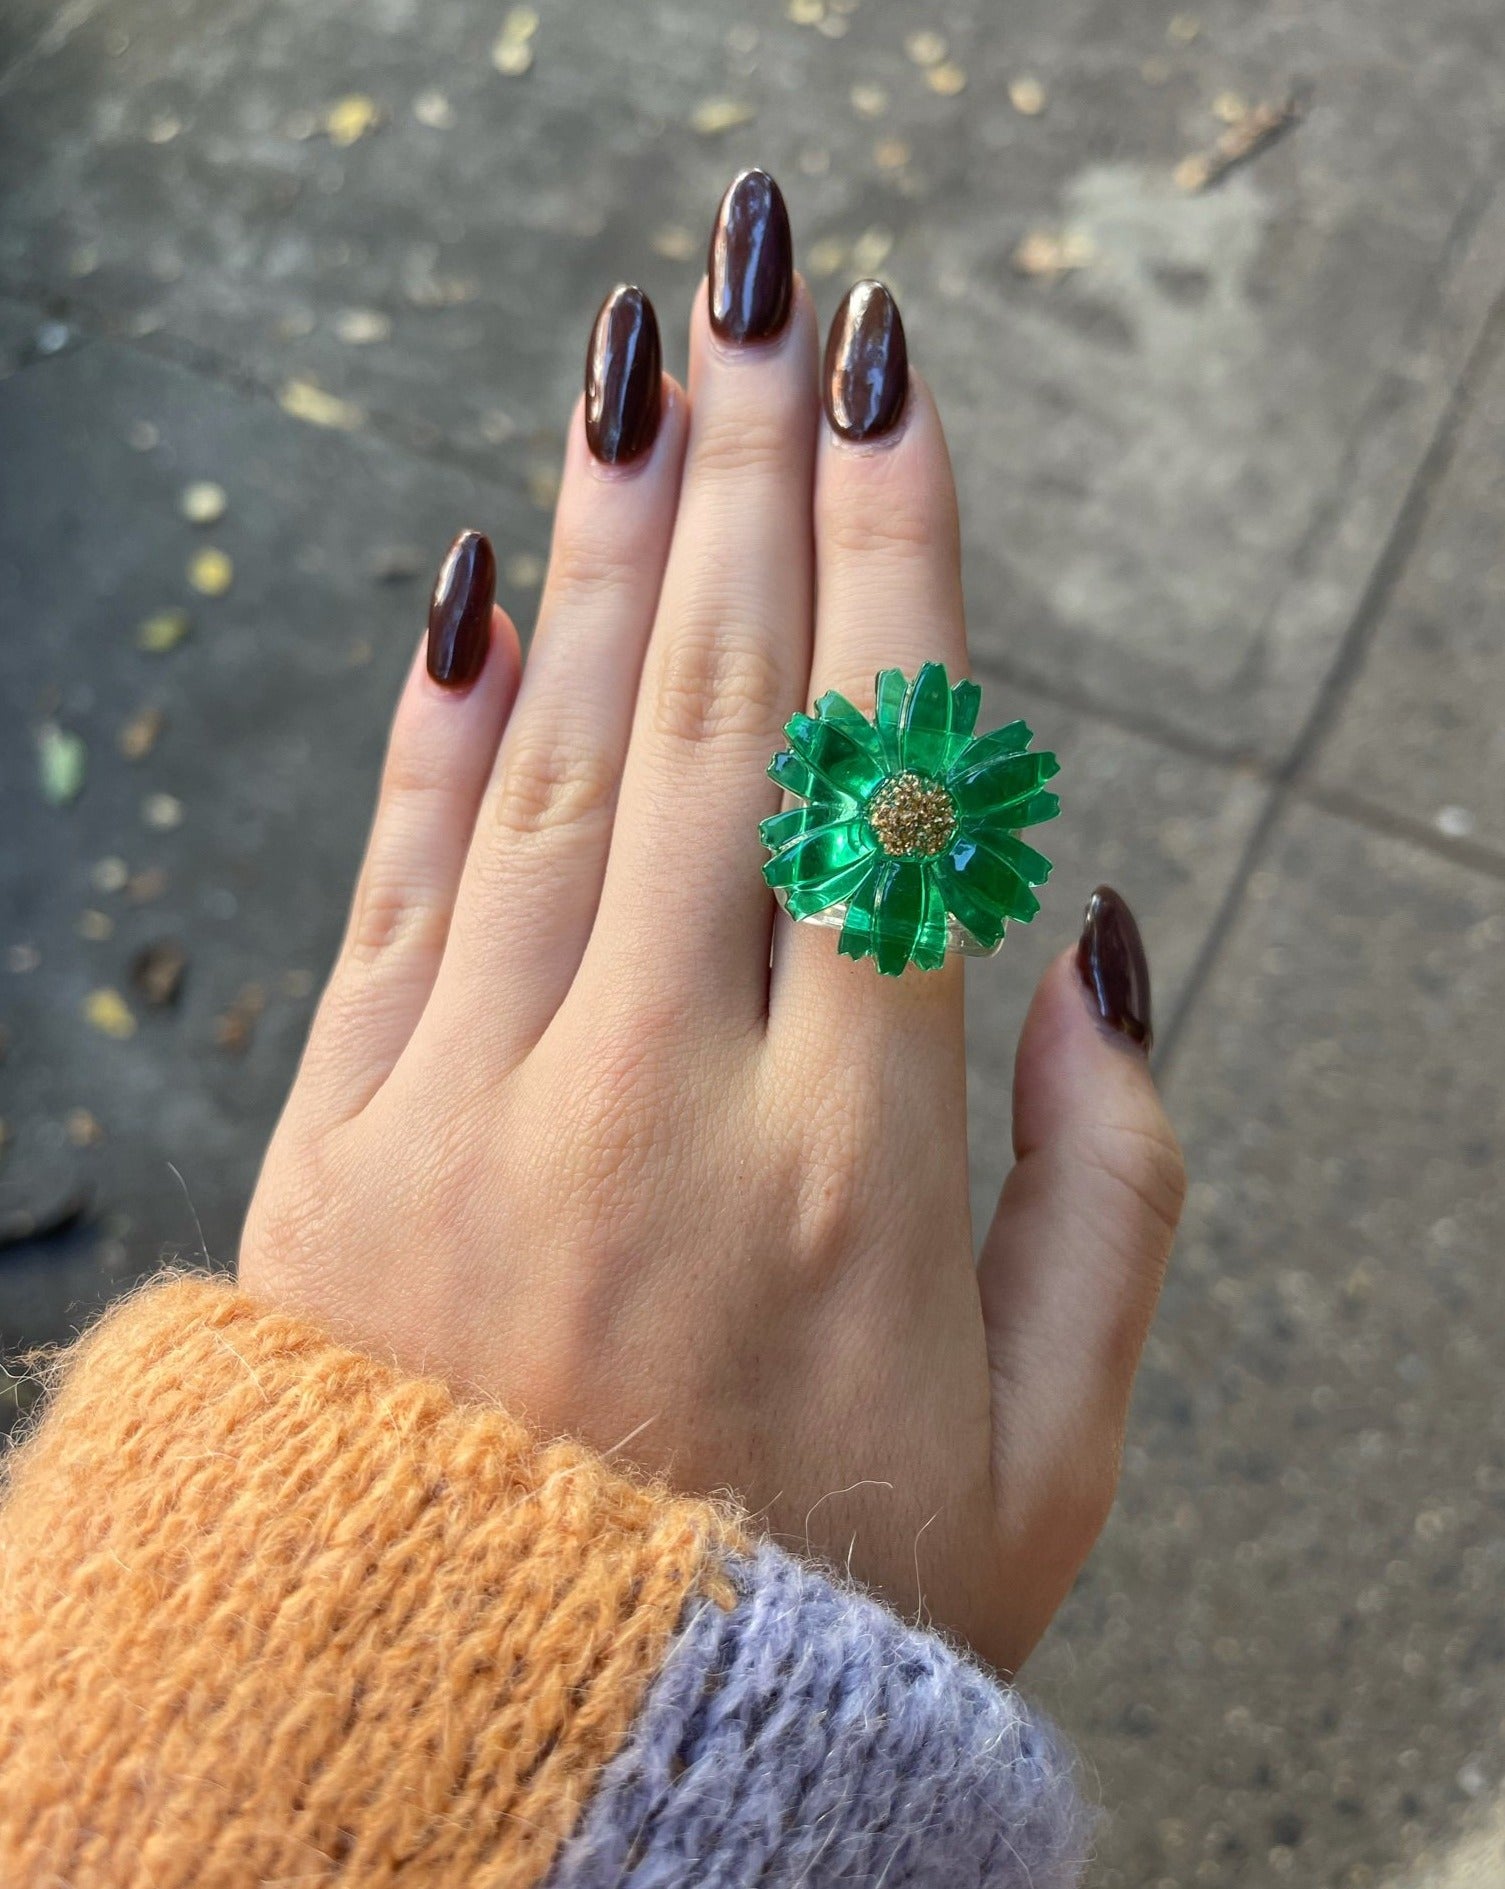 A close up of a hand wearing a green version of ring.